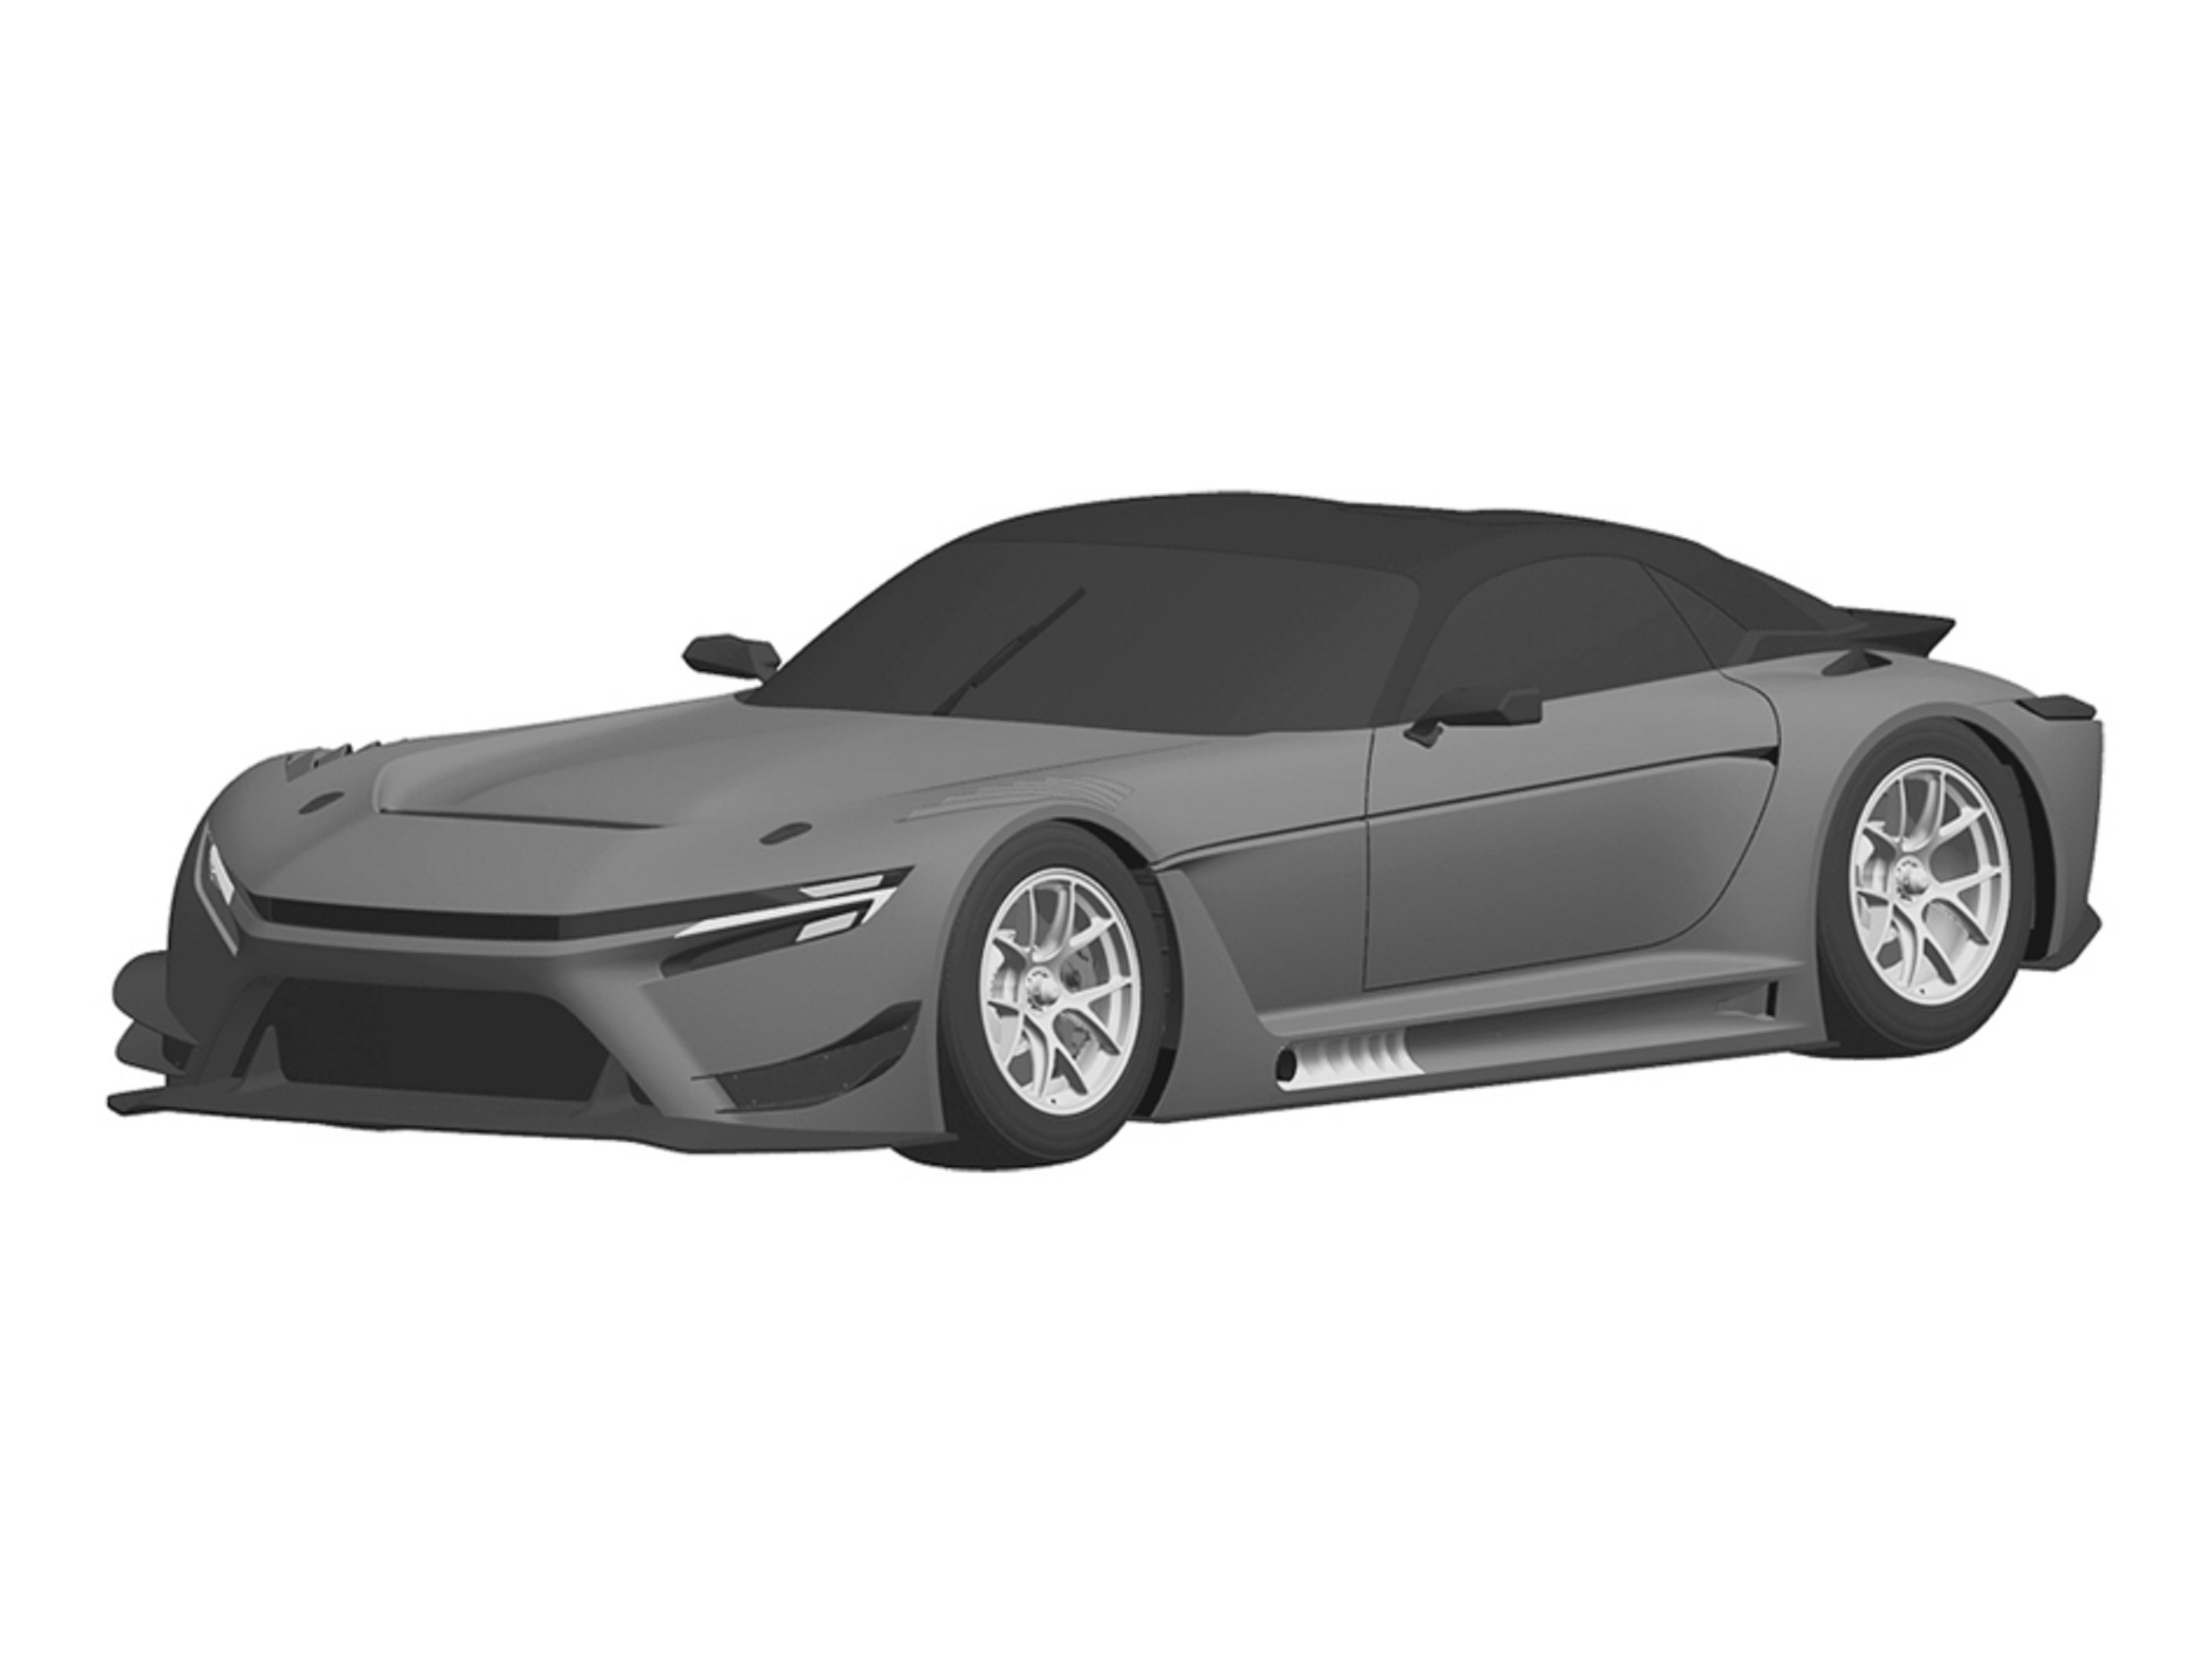 The Toyota GR GT3 in a recent Toyota trademark filing